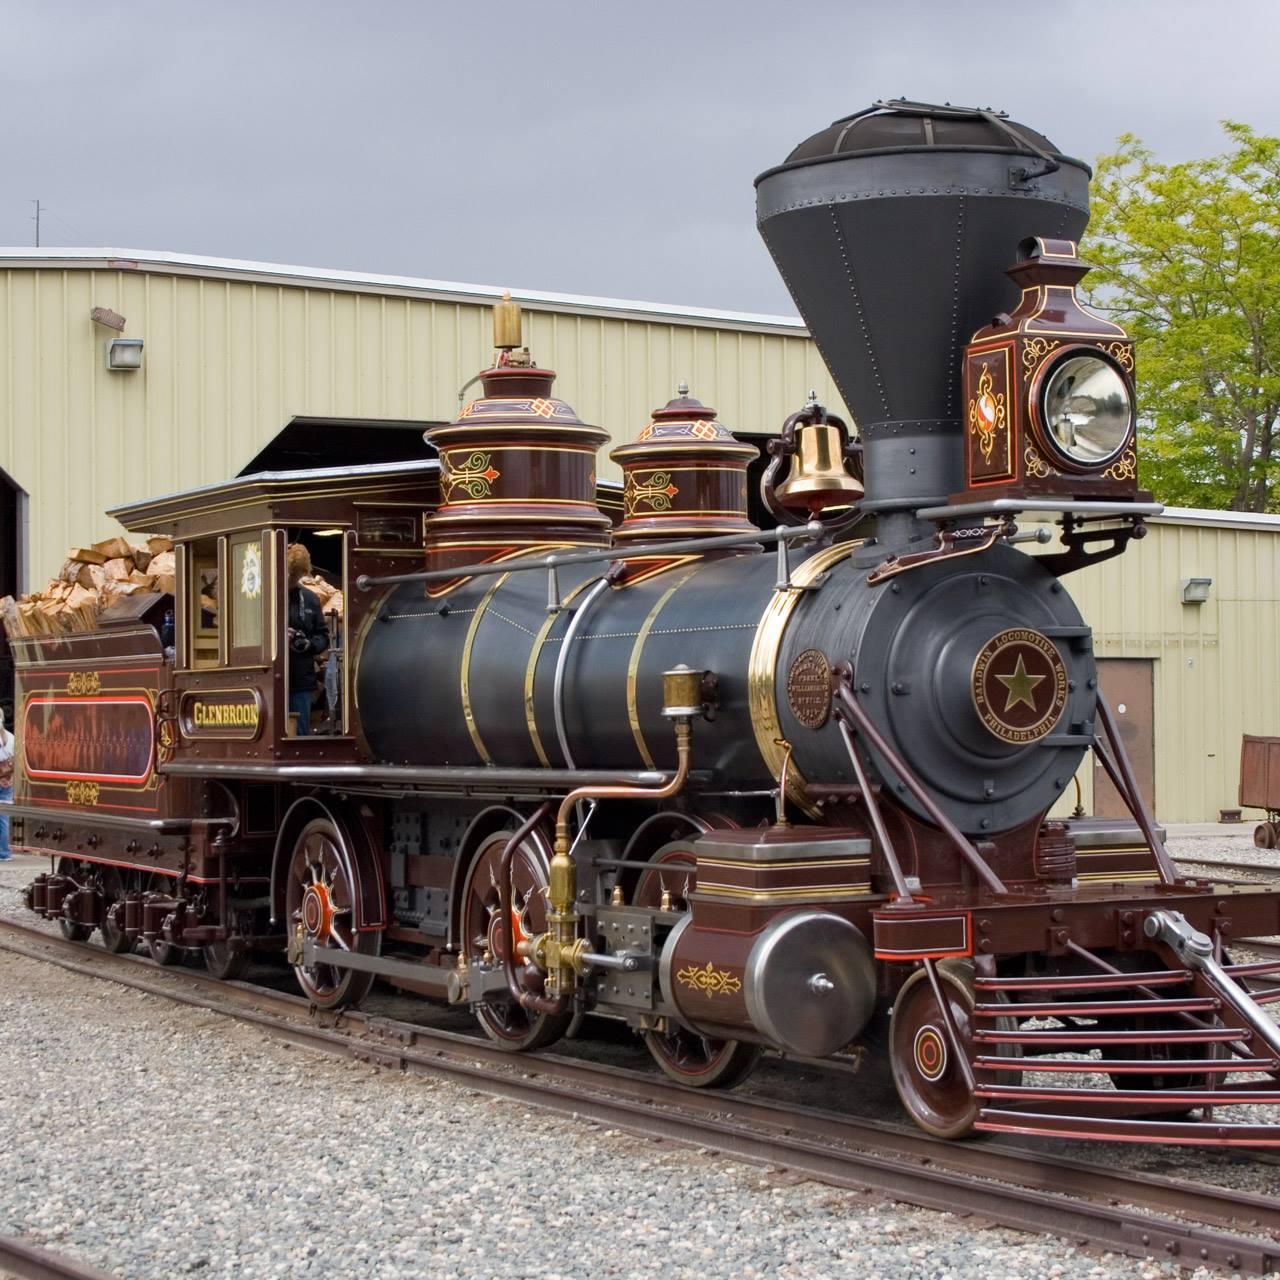 "Glenbrook" first public steam up. May 22, 2015